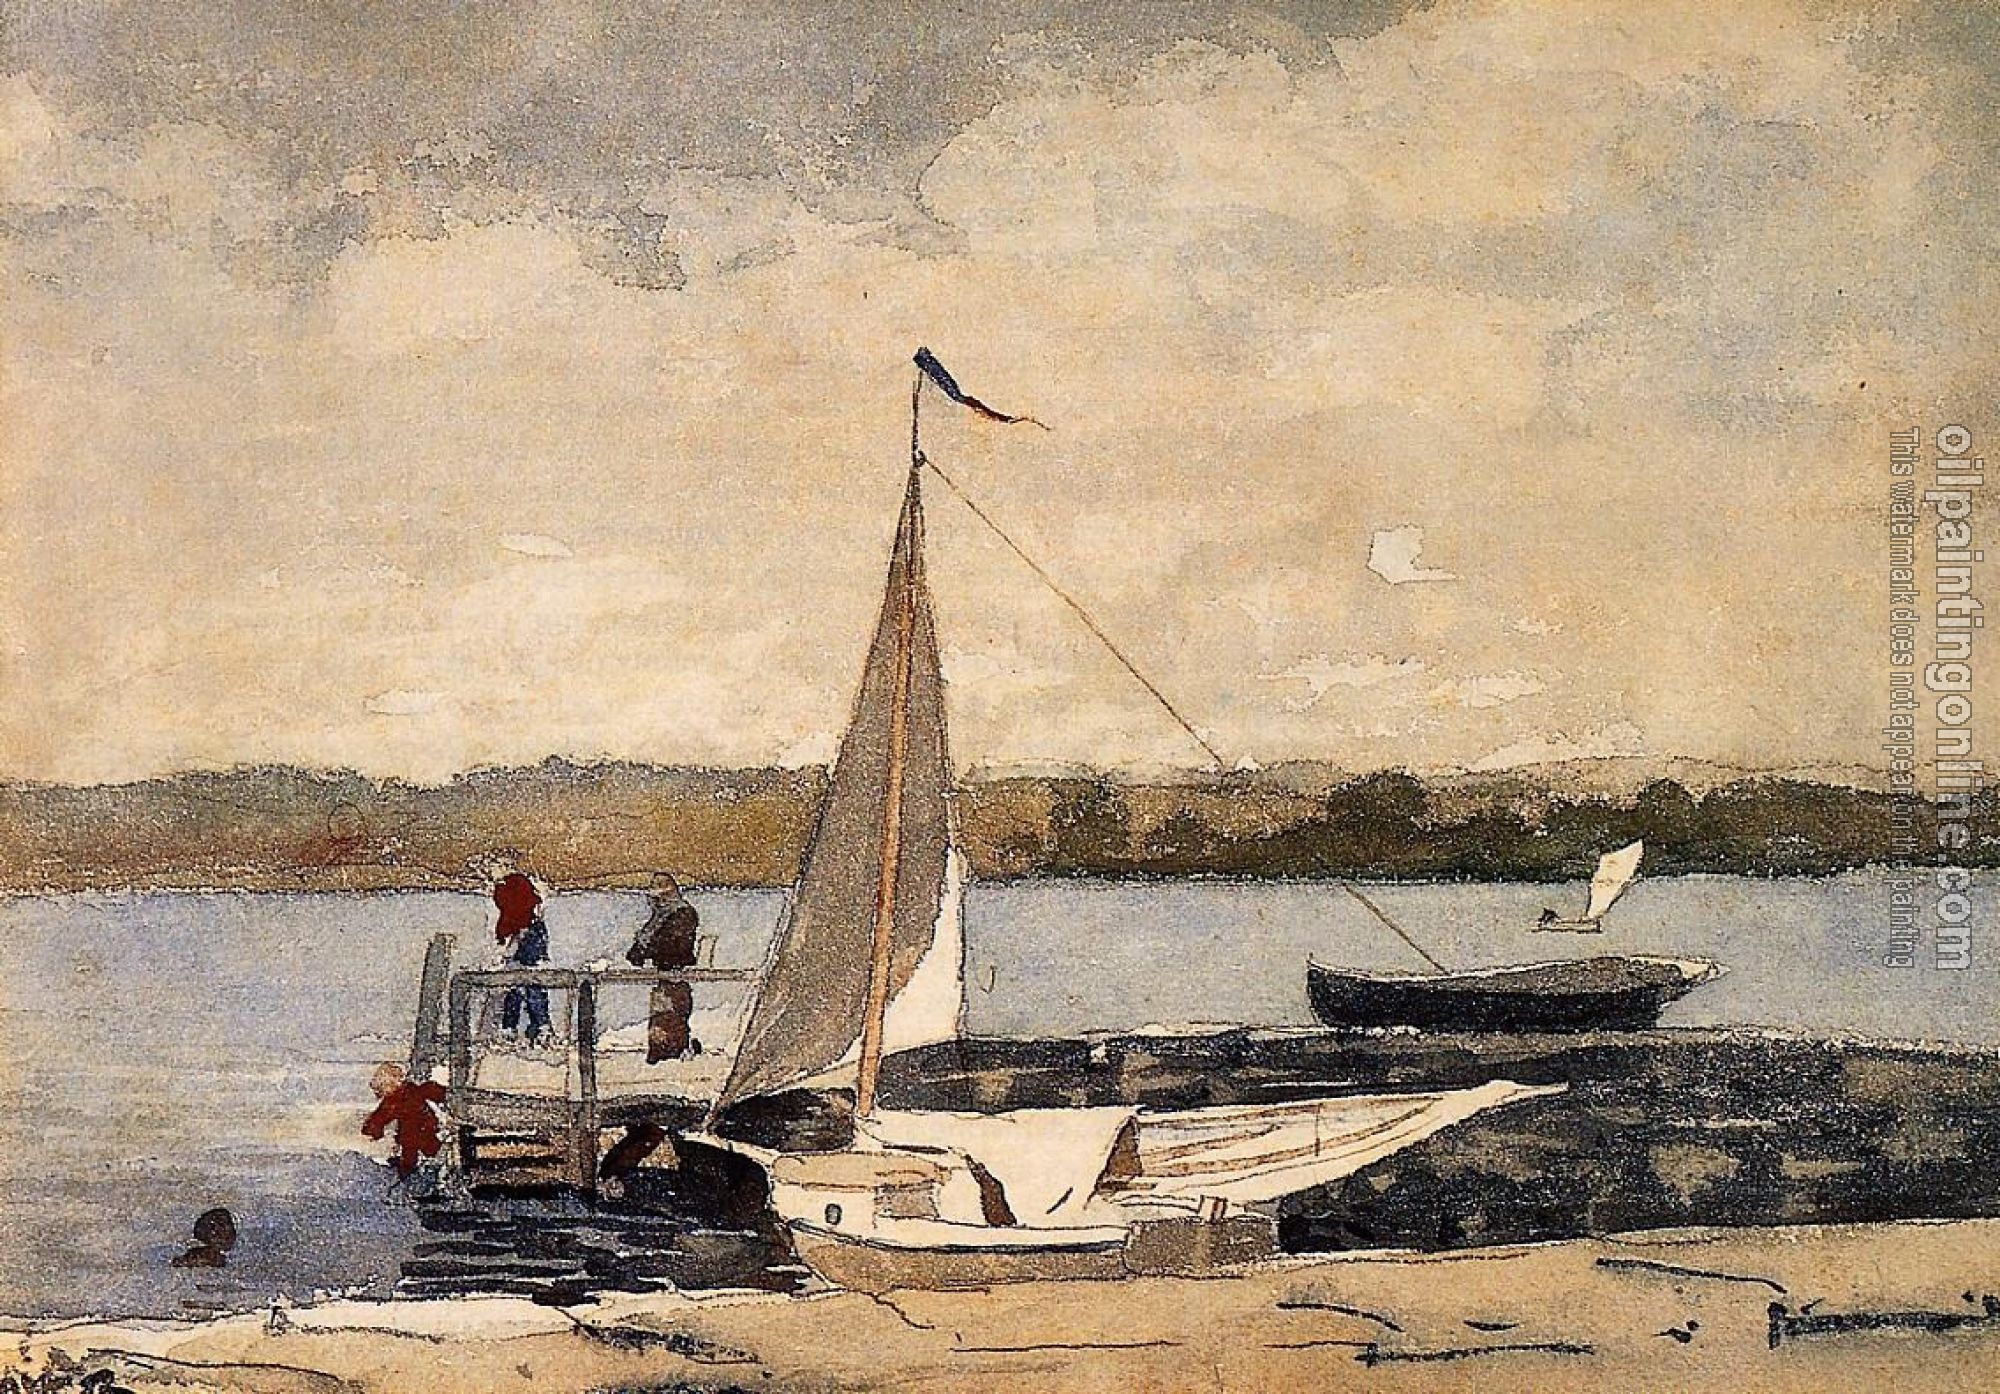 Homer, Winslow - A Sloop at a Wharf, Gloucester